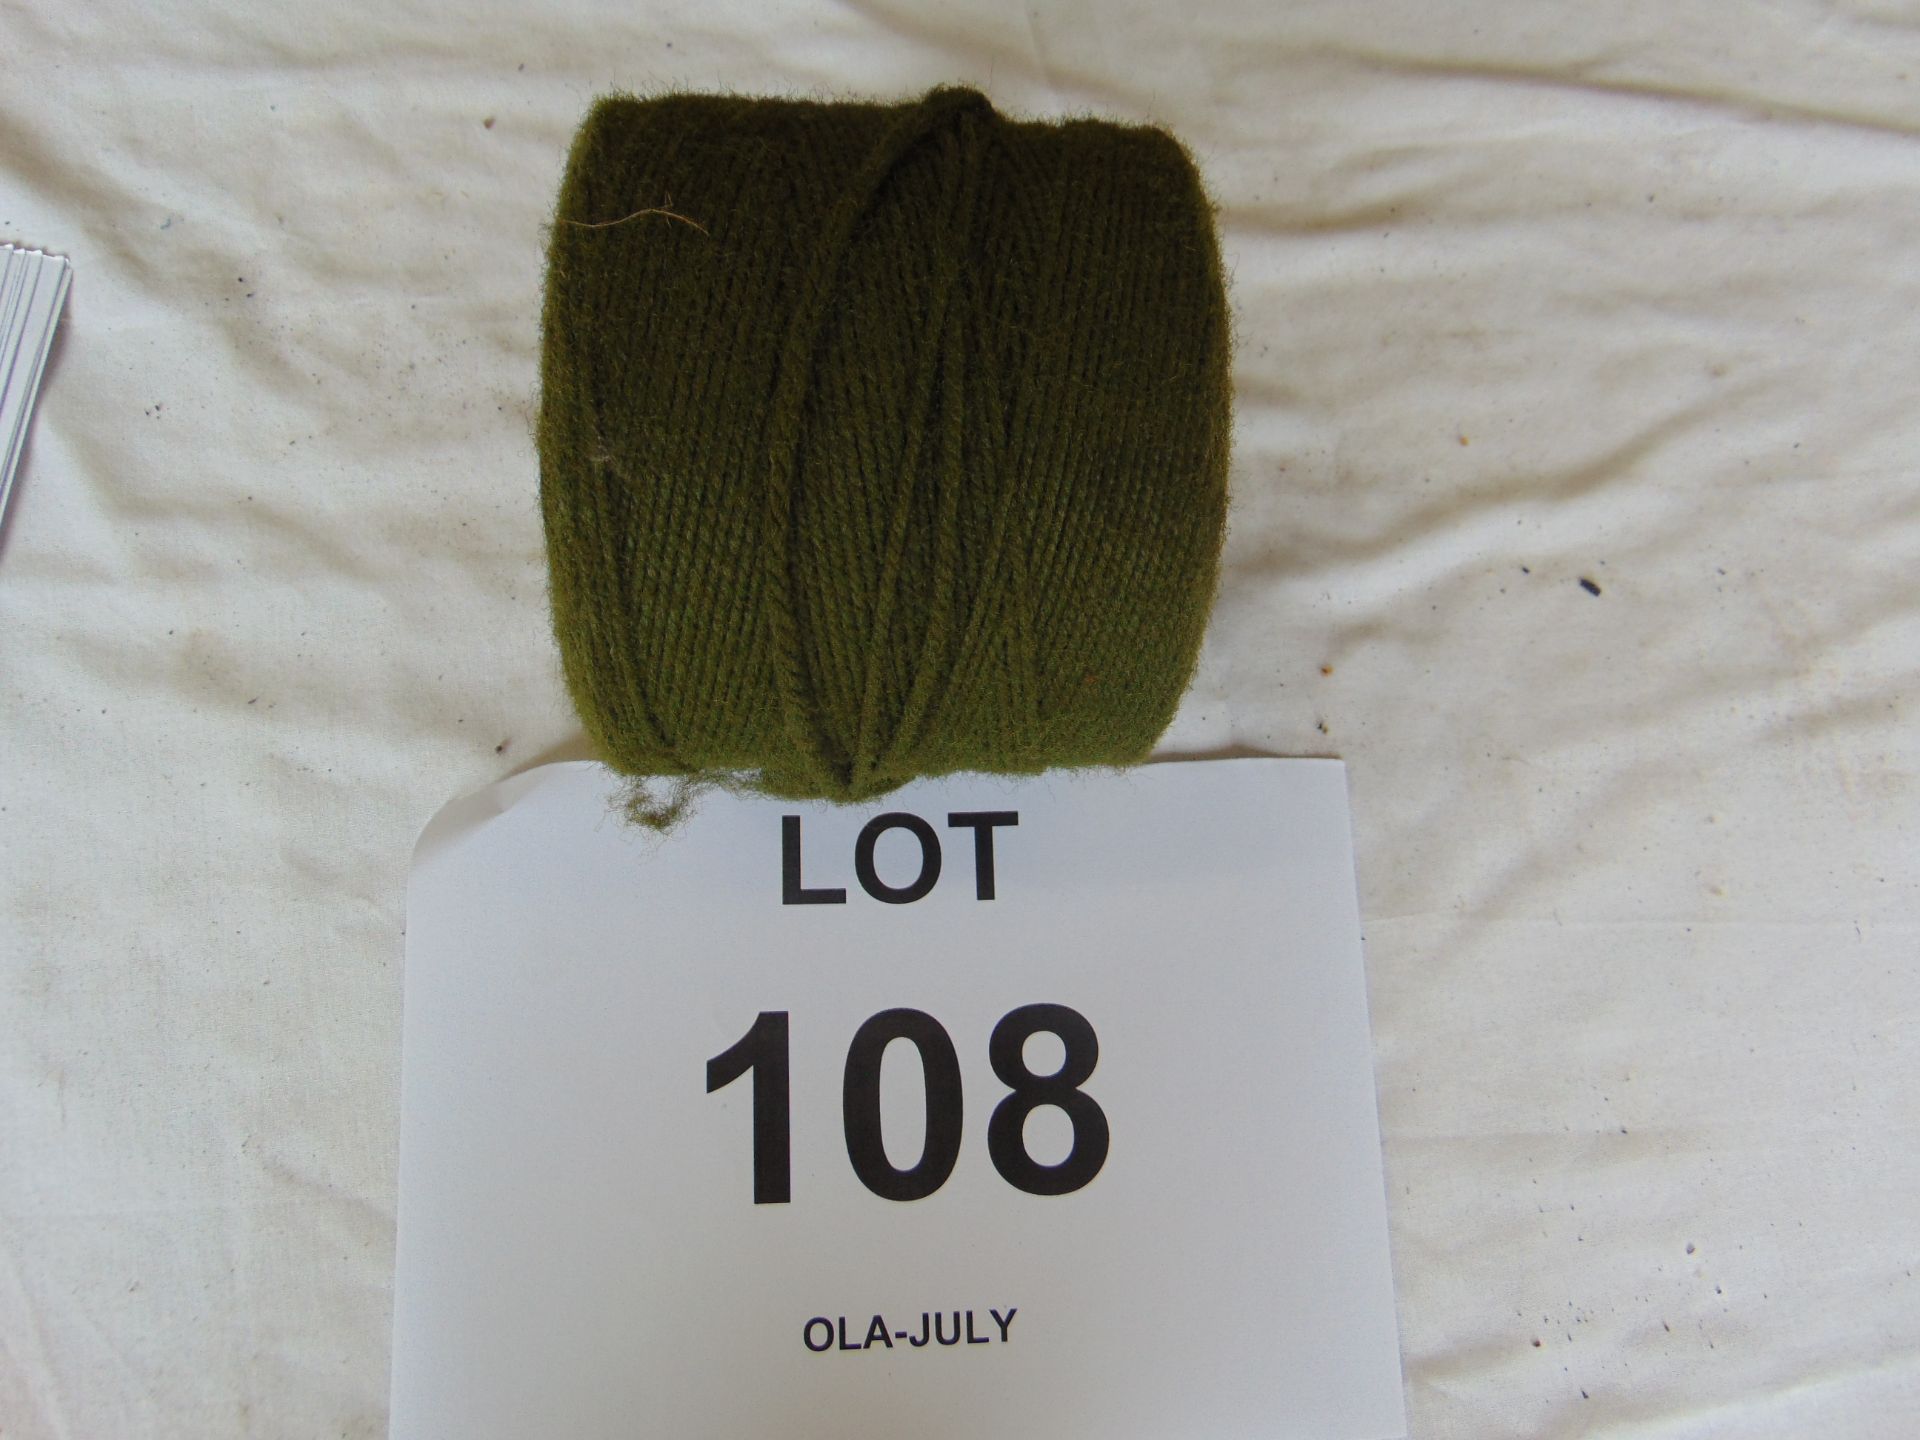 1 x Roll of 3 ply British Army Twine - Image 2 of 4